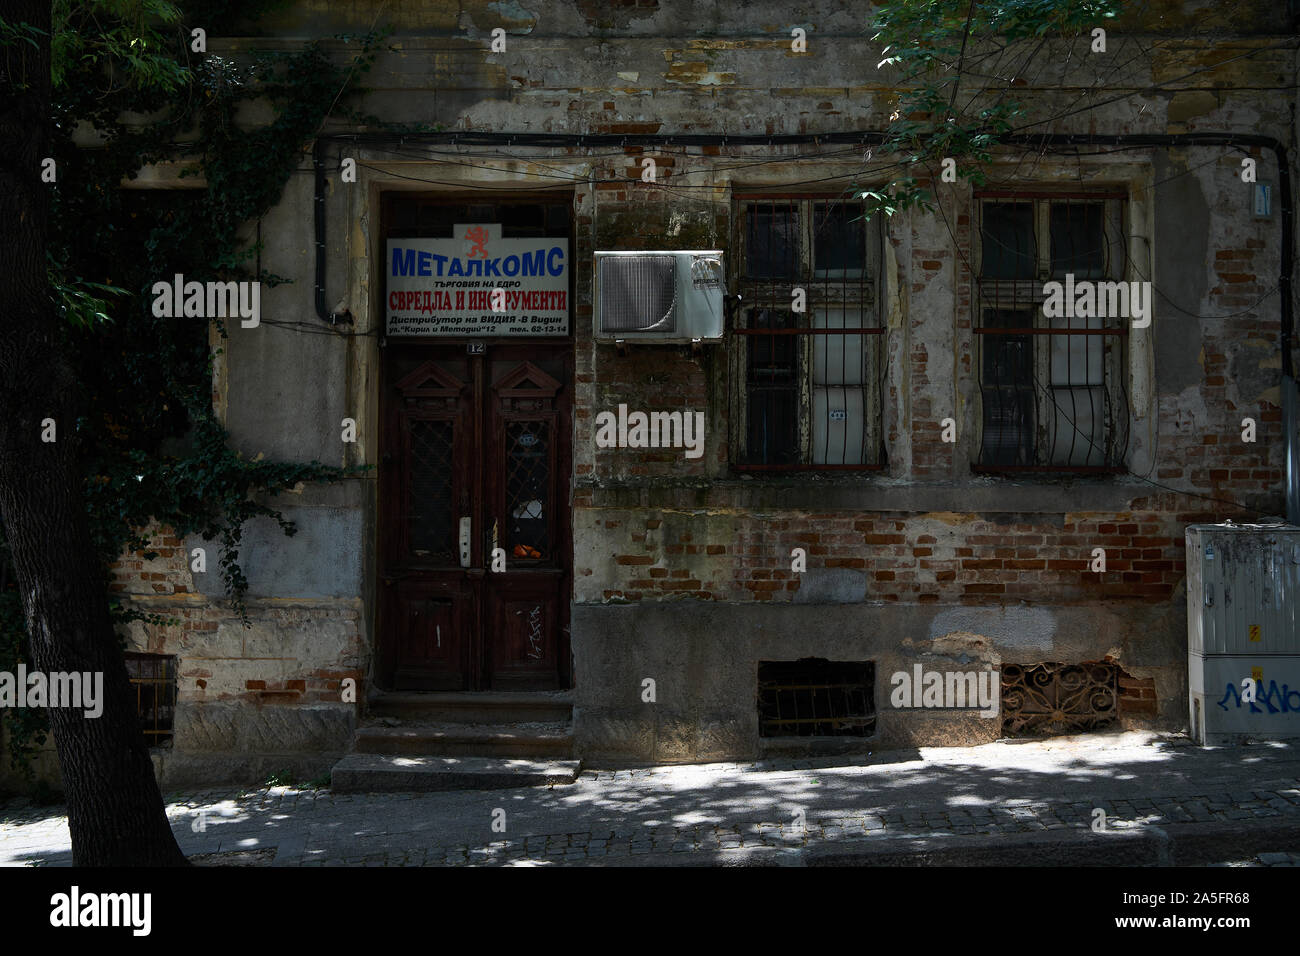 PLOVDIV, BULGARIA - JULY 02, 2019: One of the streets in the old city. Plovdiv is the second largest city in Bulgaria. Stock Photo